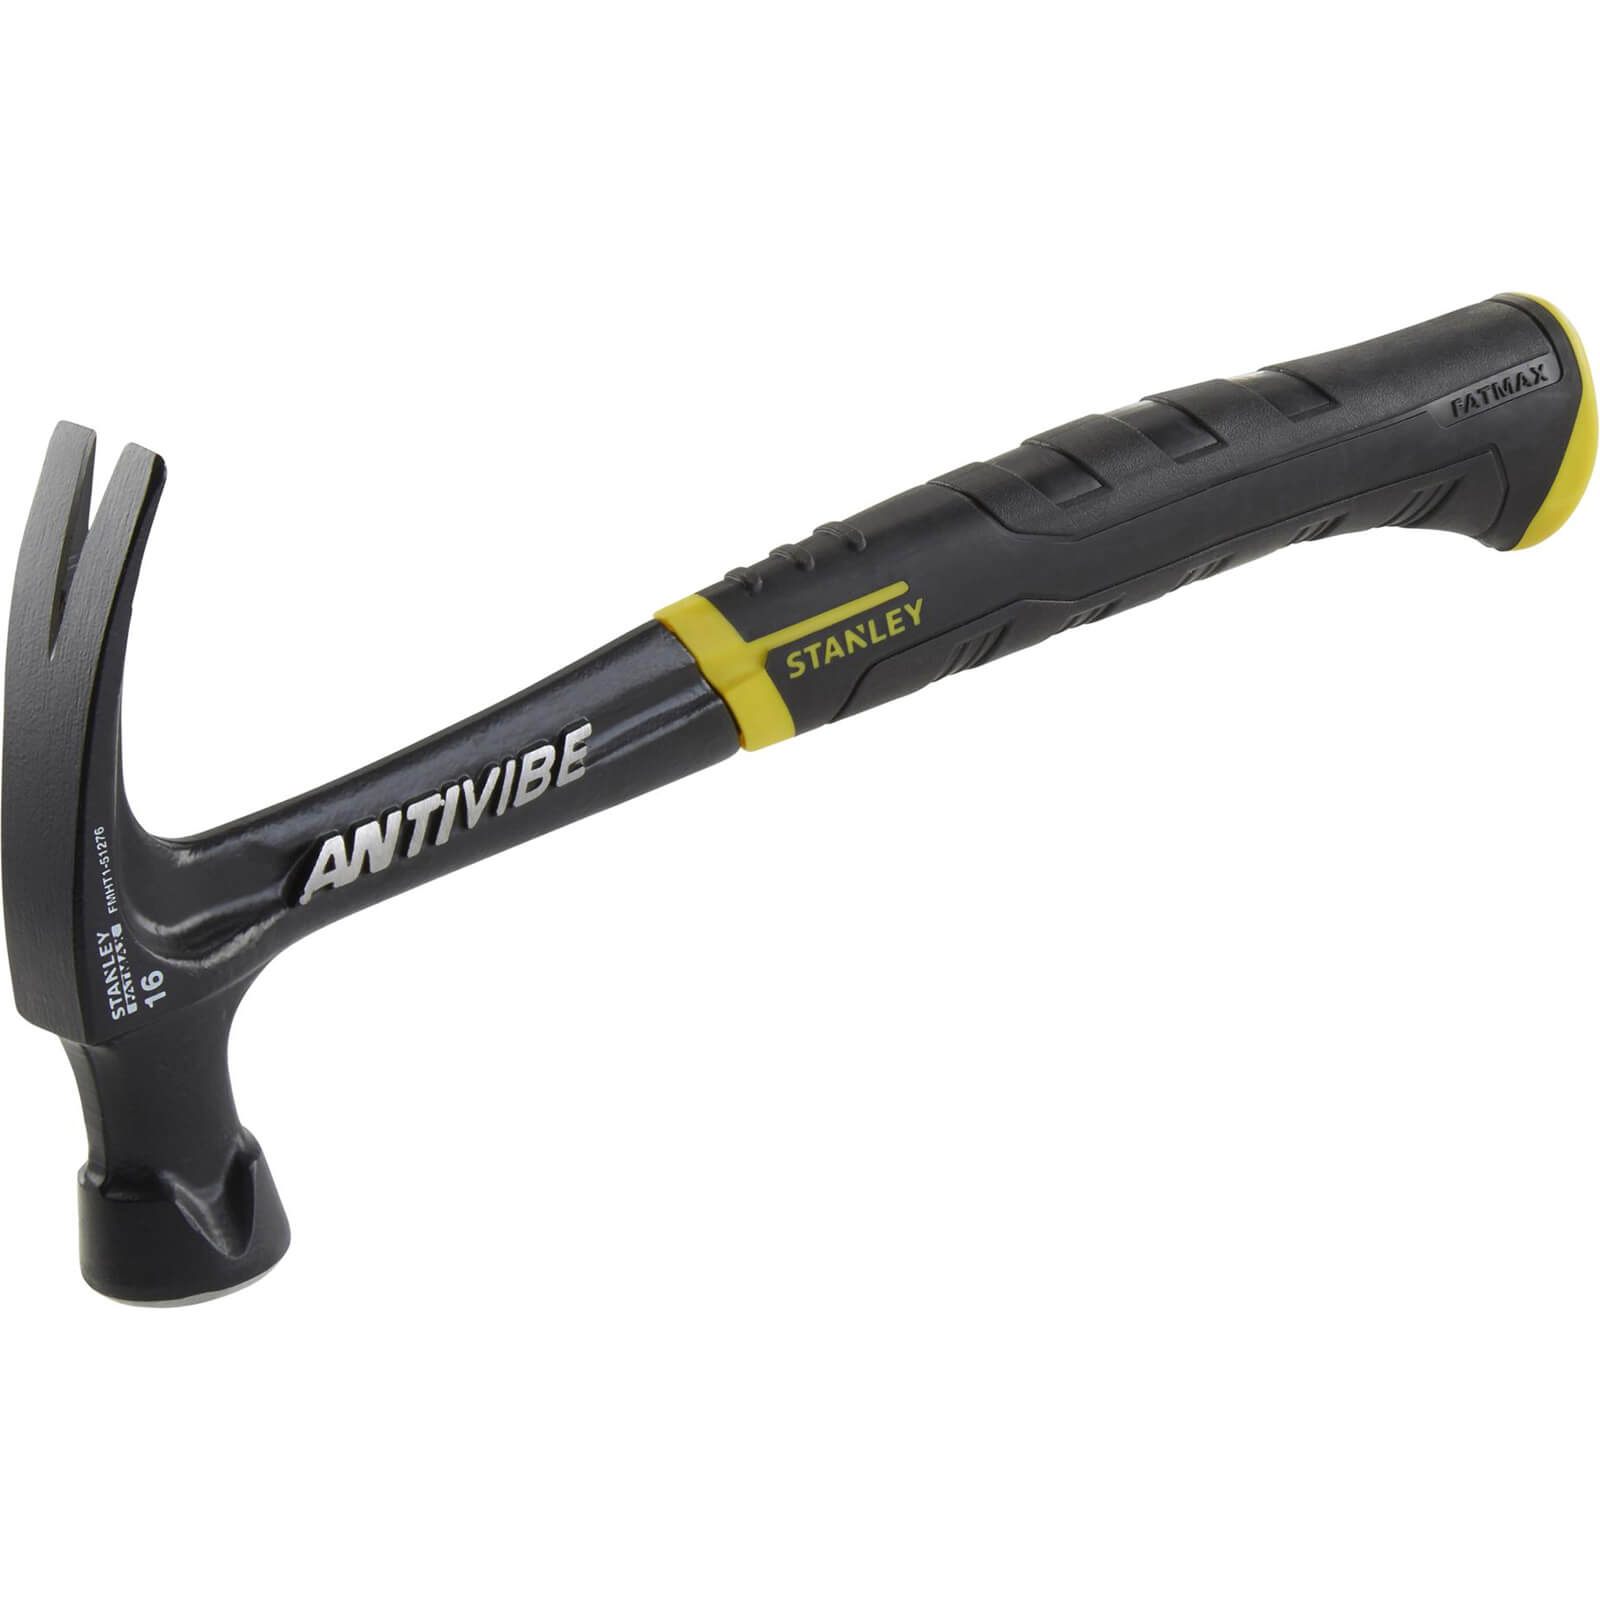 Image of Stanley FatMax Antivibe Rip Claw Hammer 450g